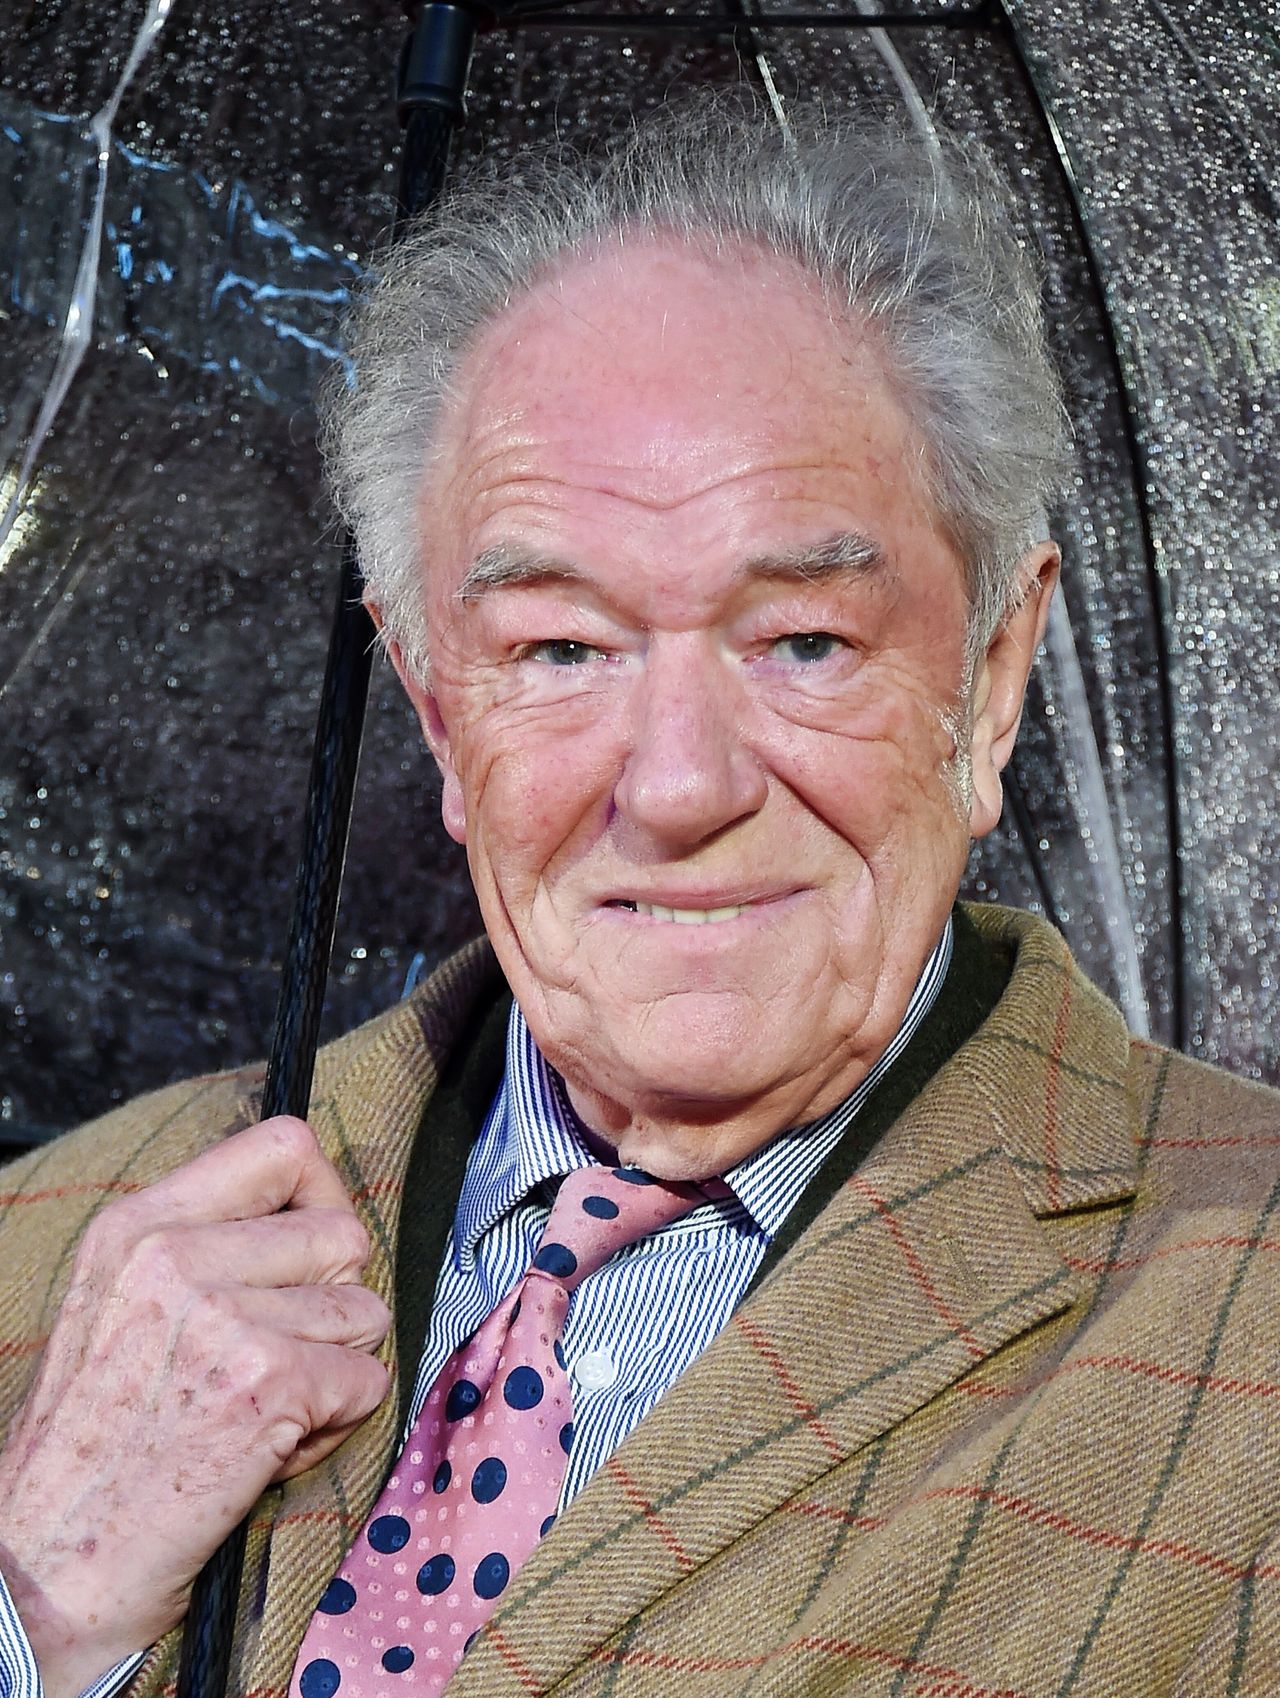 Michael Gambon has passed away. He played Dumbledore in the Harry Potter movies